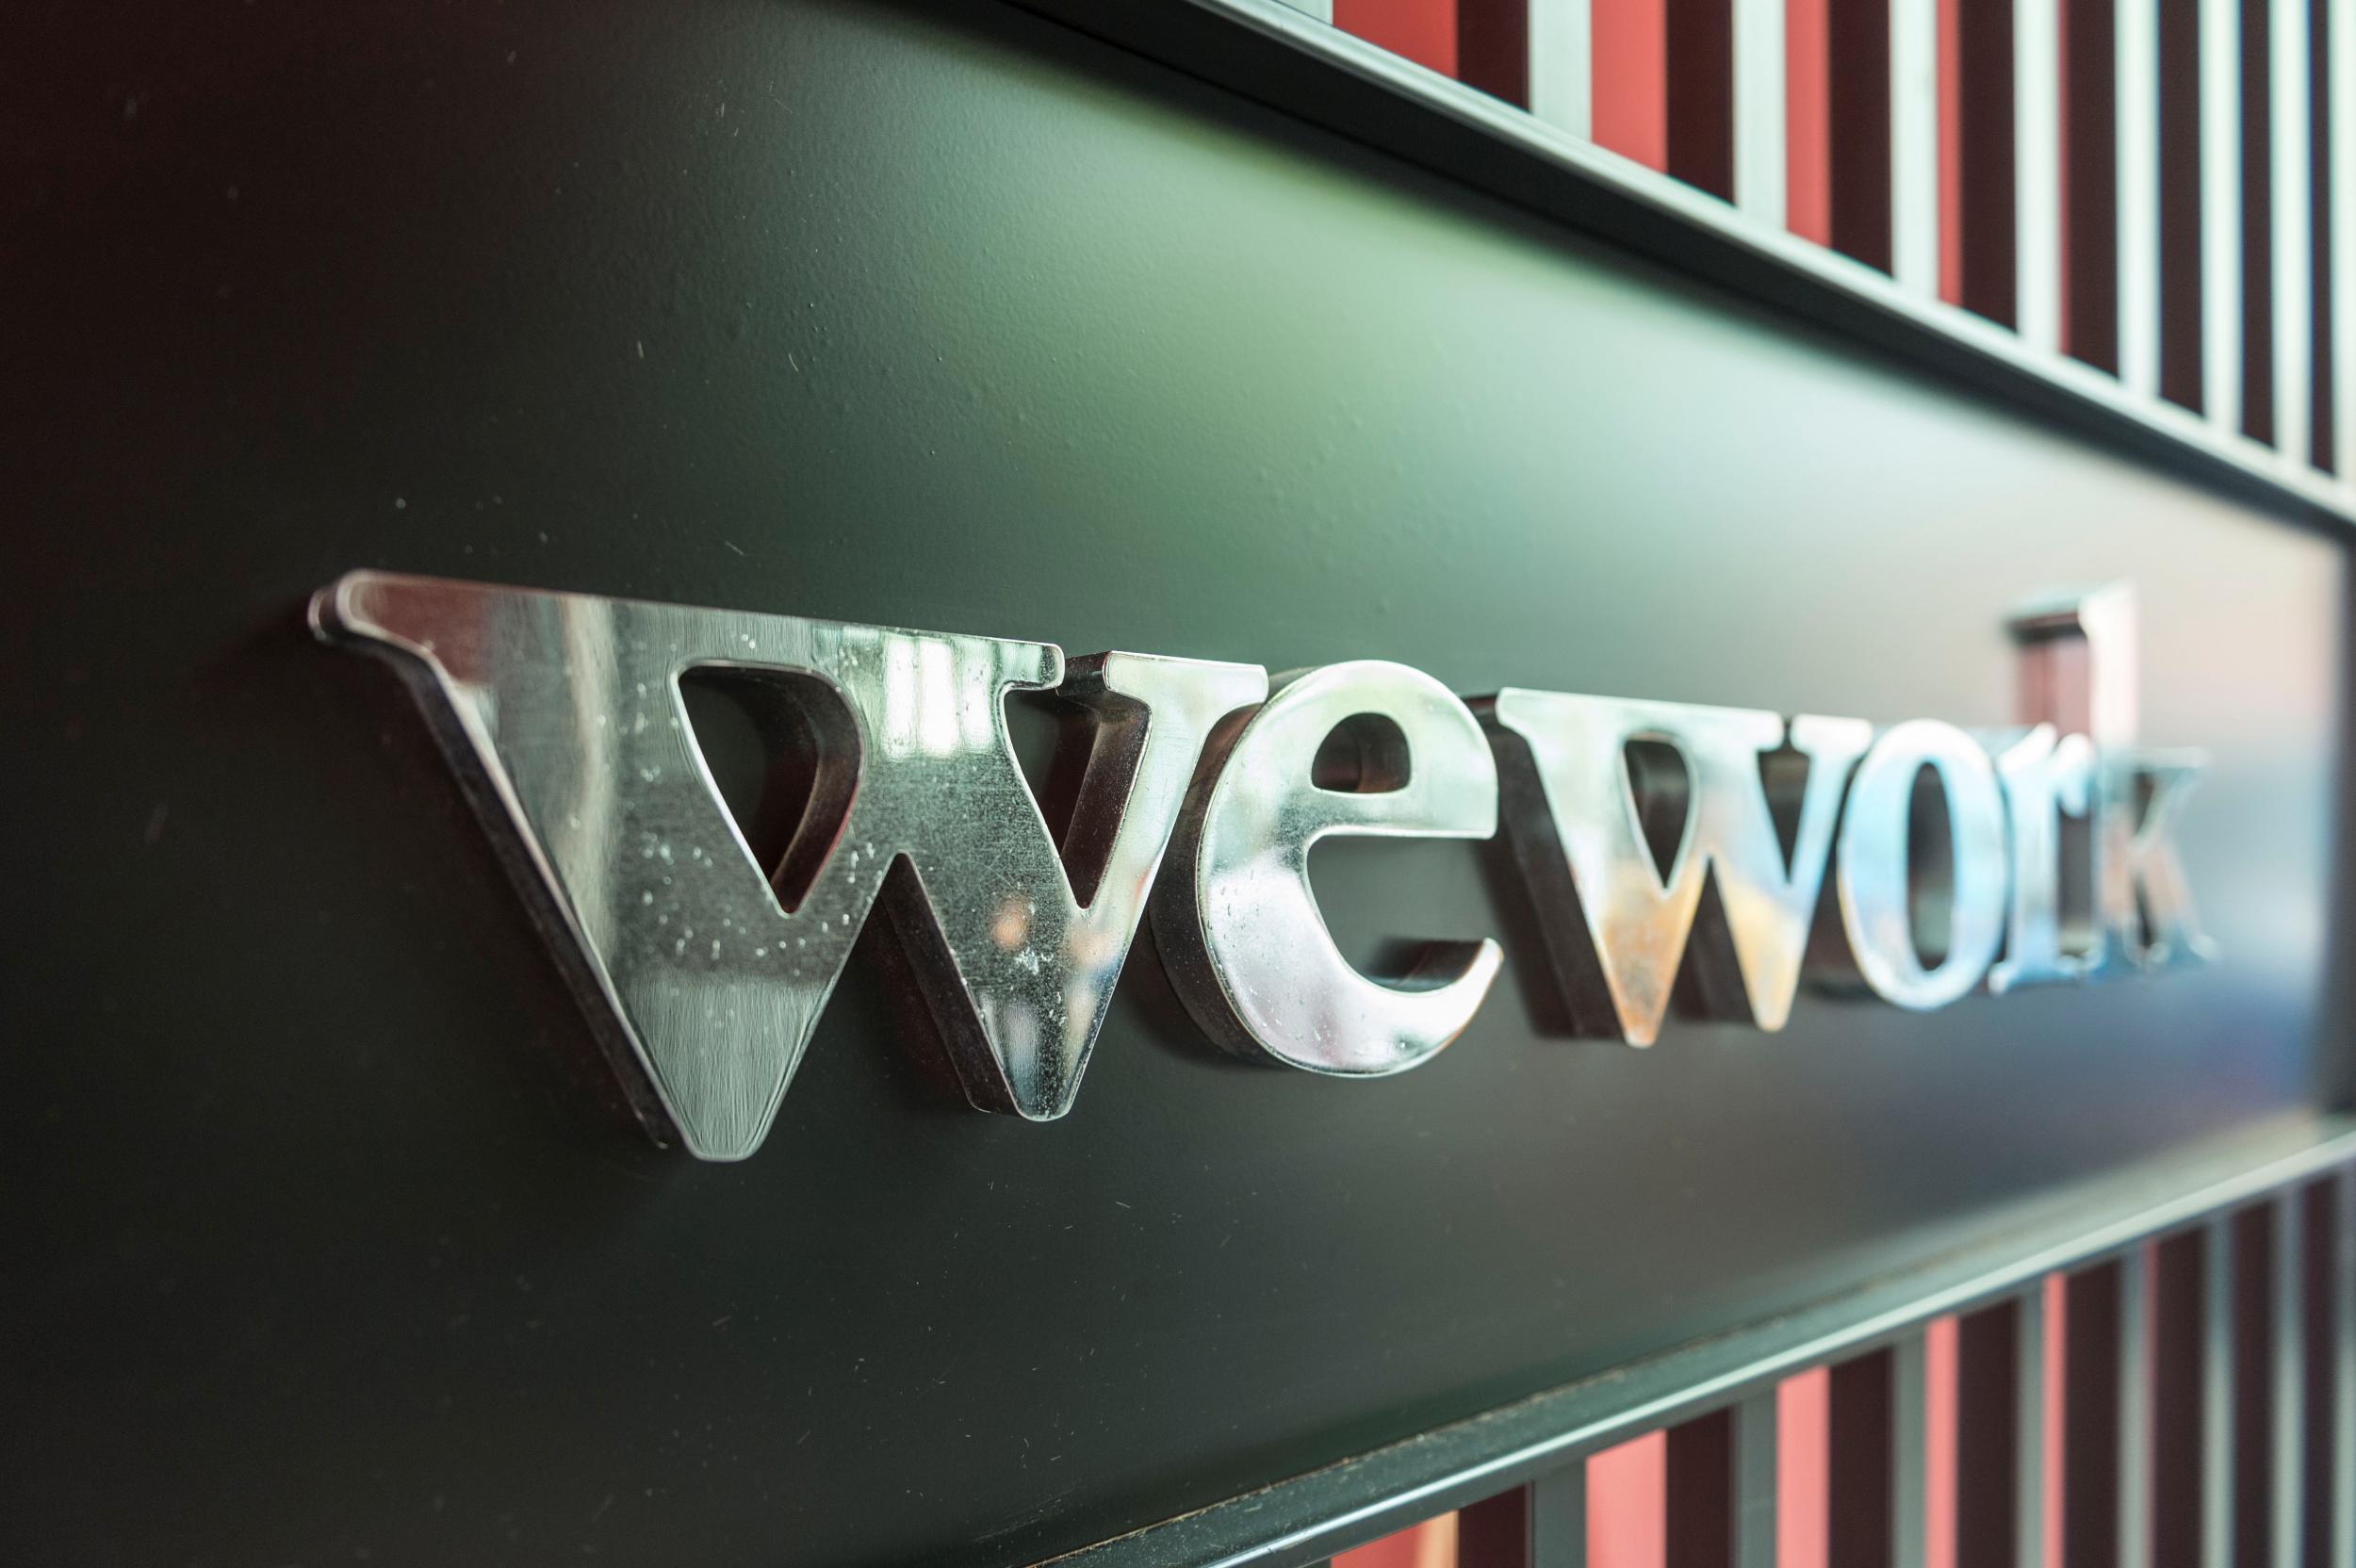 WeWork operates more than 250 locations worldwide